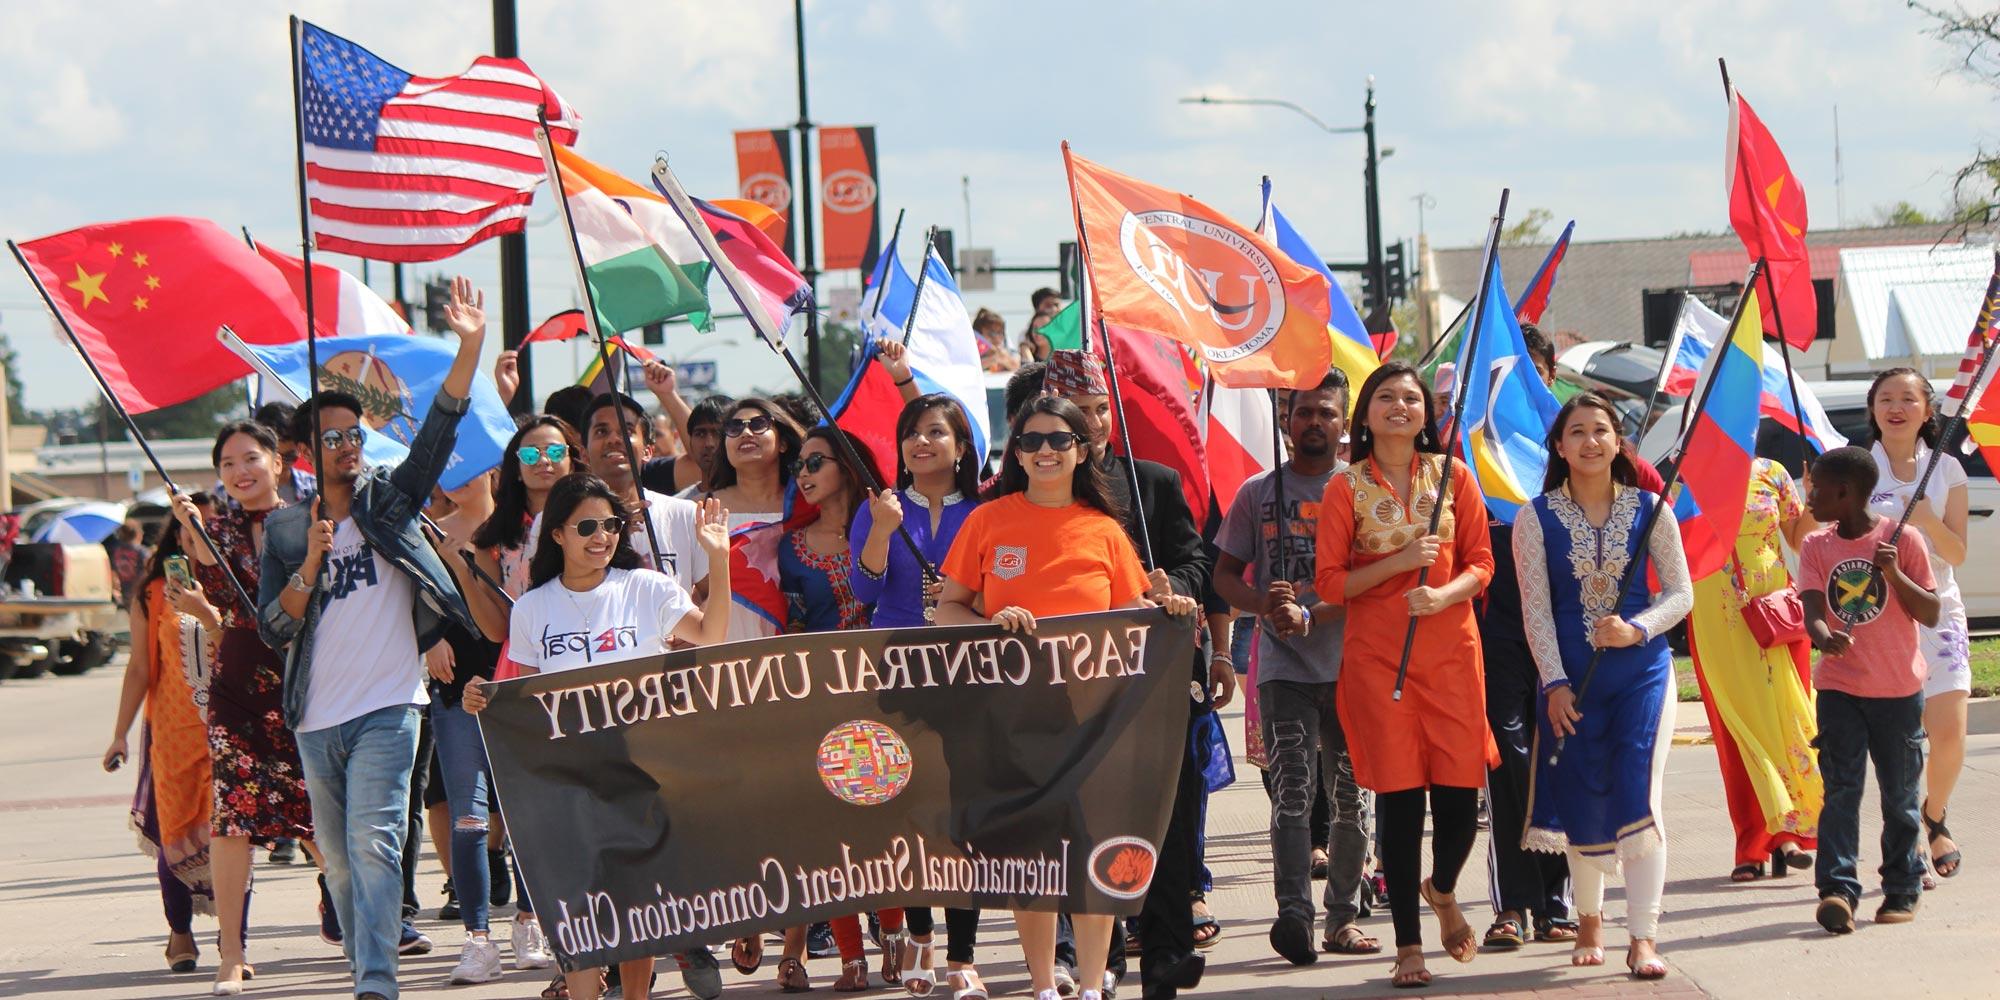 international student connection club members in parade